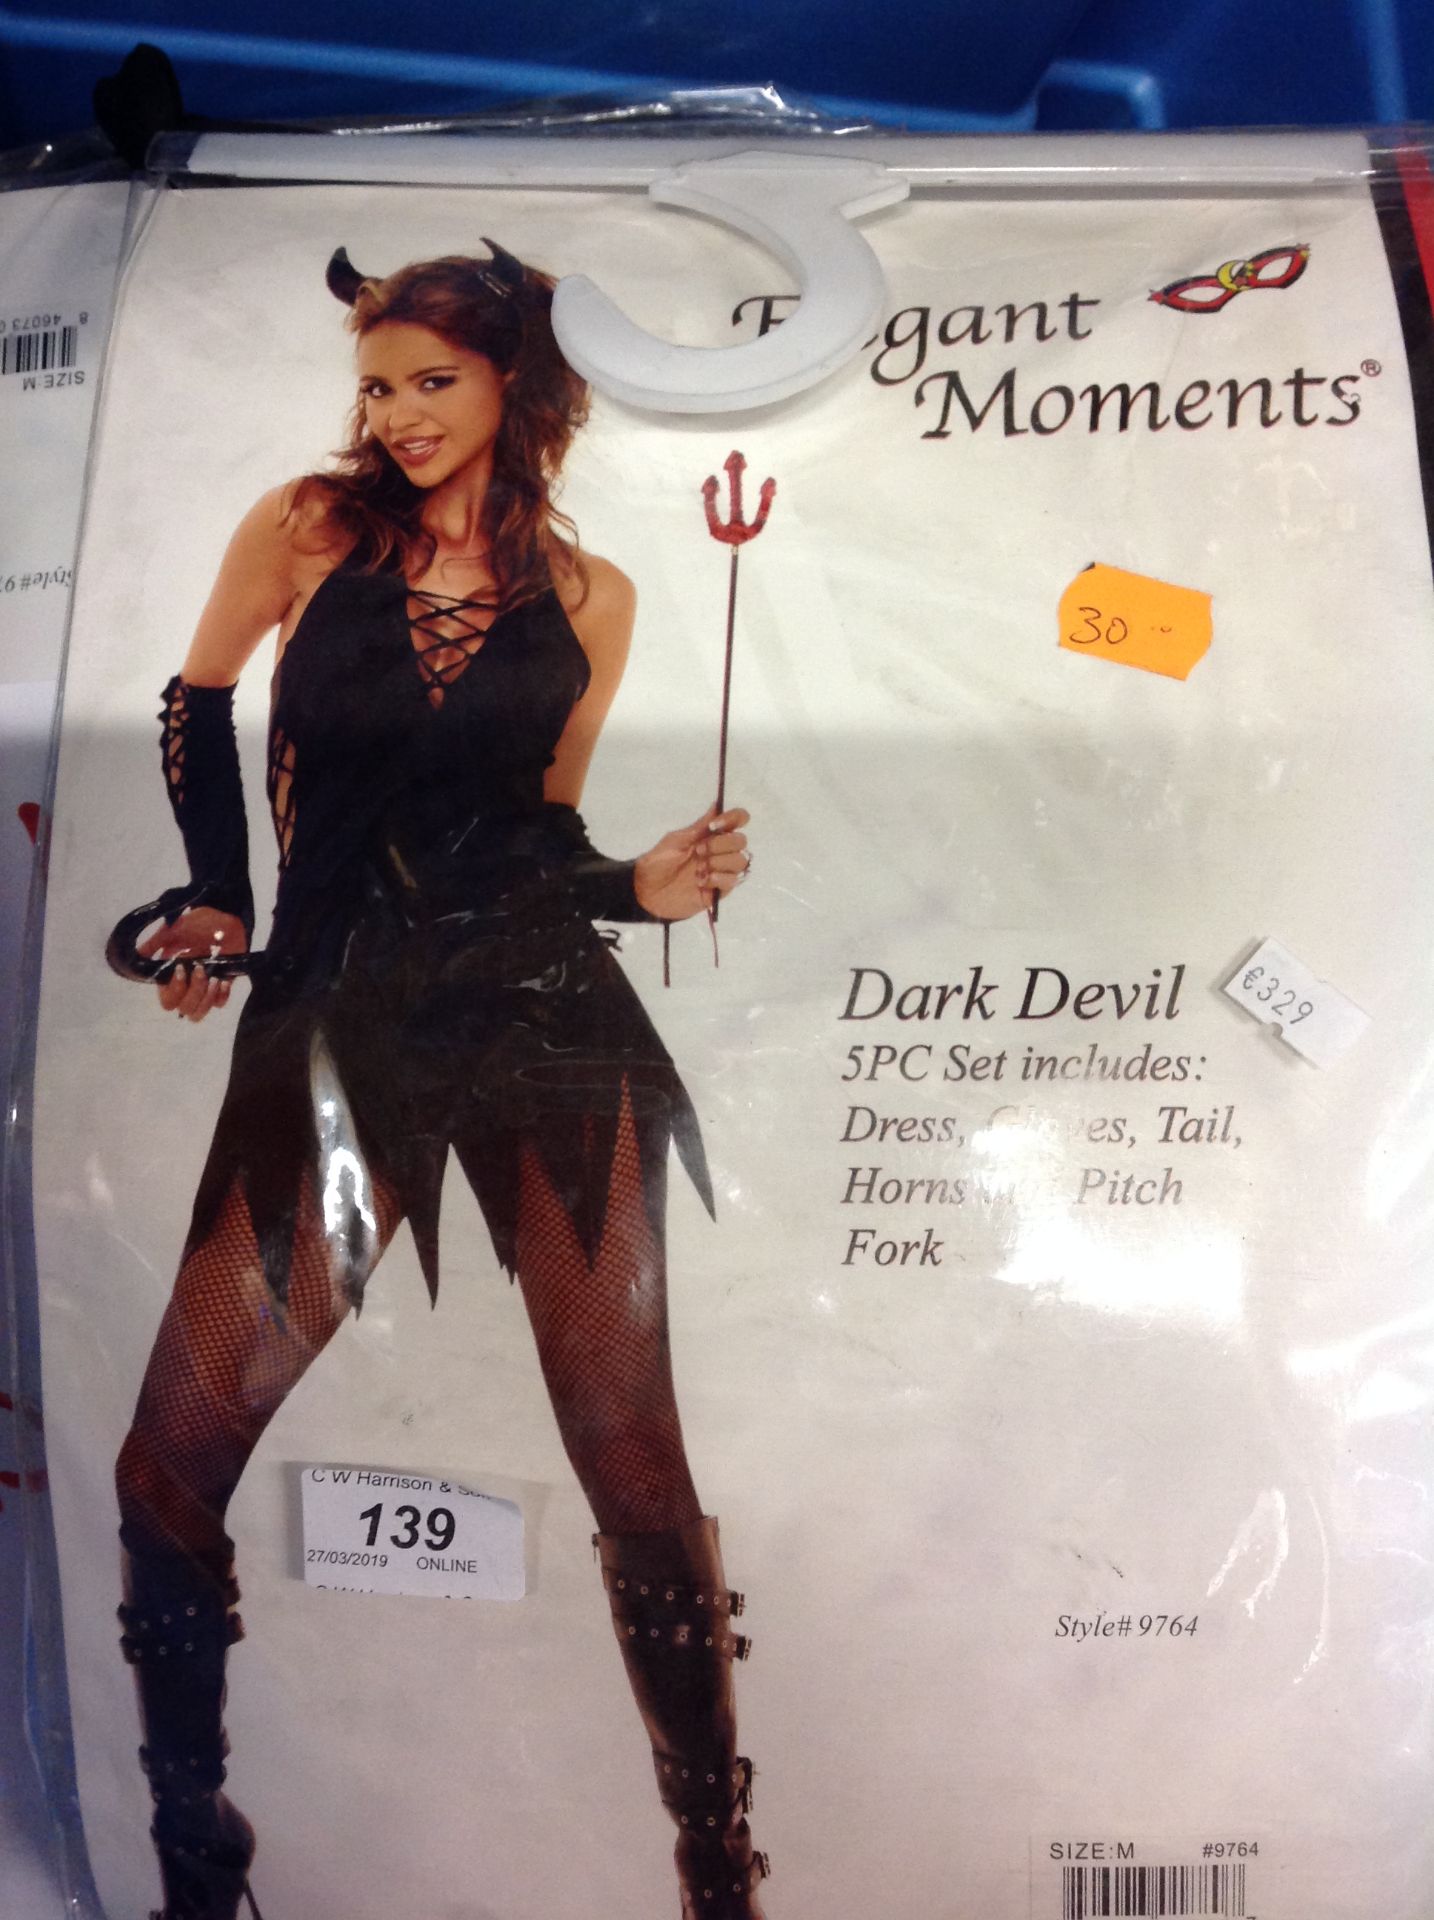 11 x Elegant Moments adults dark devil costumes size M - please note blue crates are not included